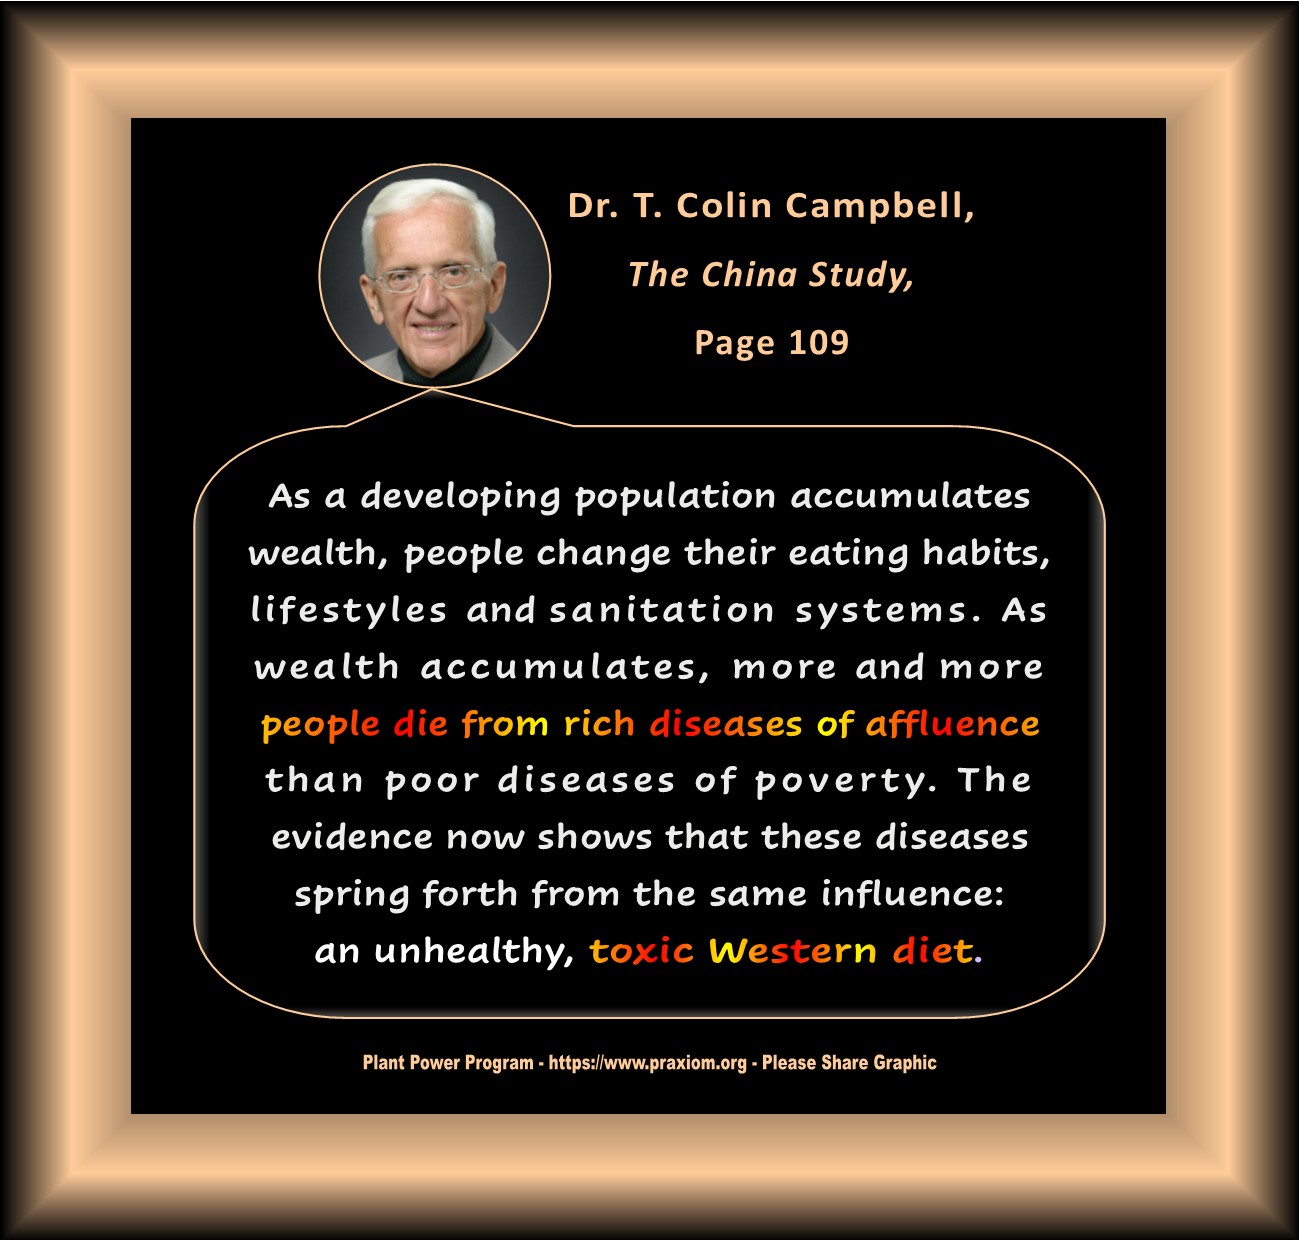 Modern Diseases of Affluence - Dr. T. Colin Campbell